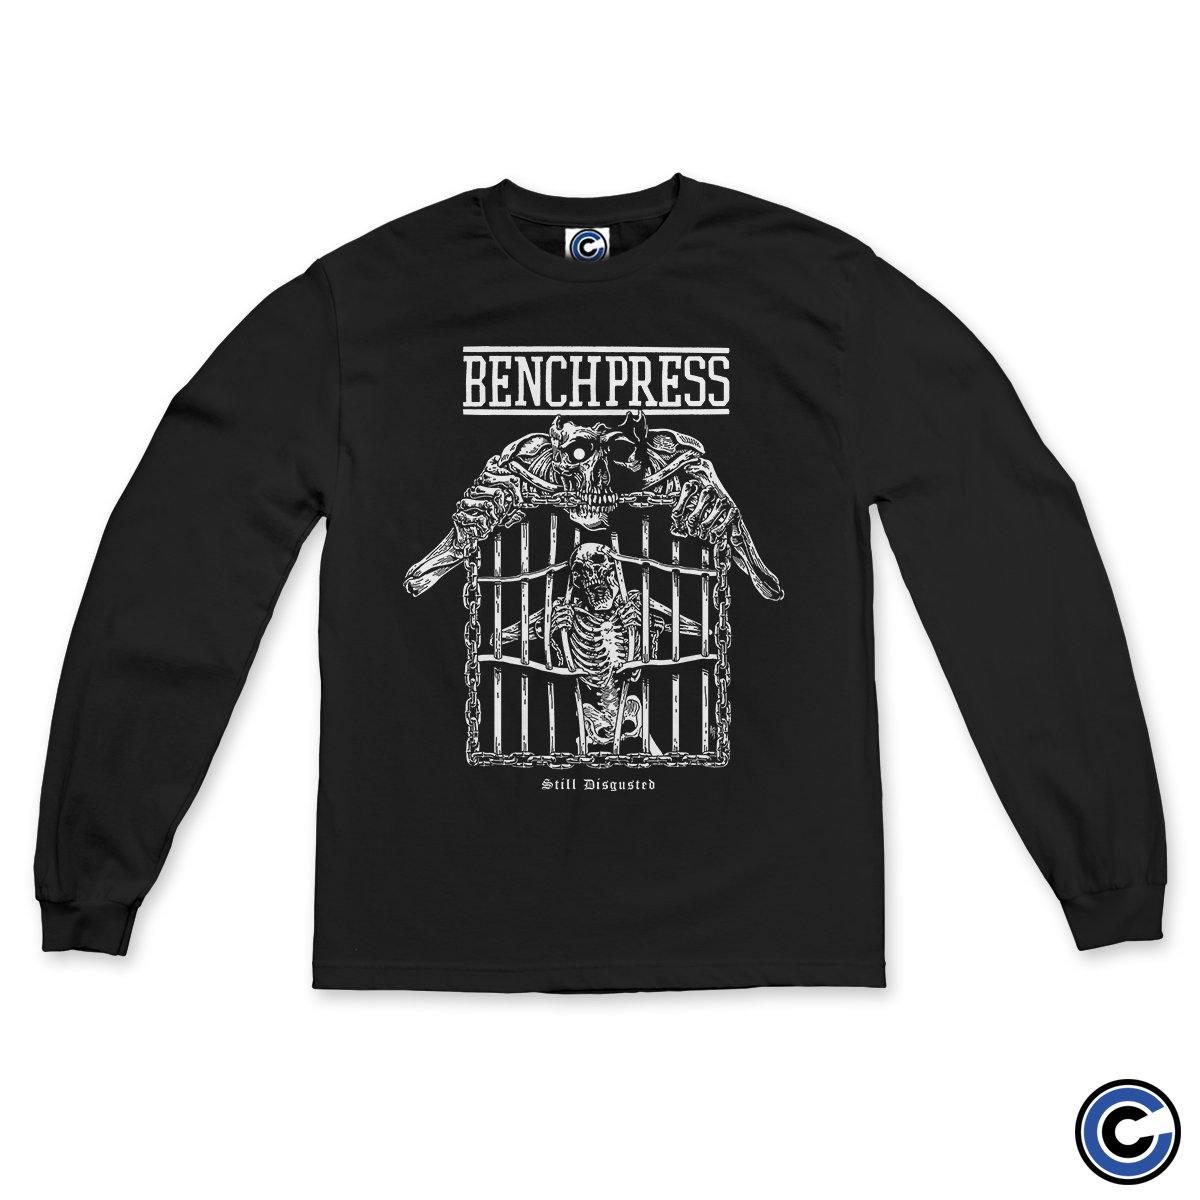 Buy – Benchpress "Still Disgusted" Long Sleeve – Band & Music Merch – Cold Cuts Merch